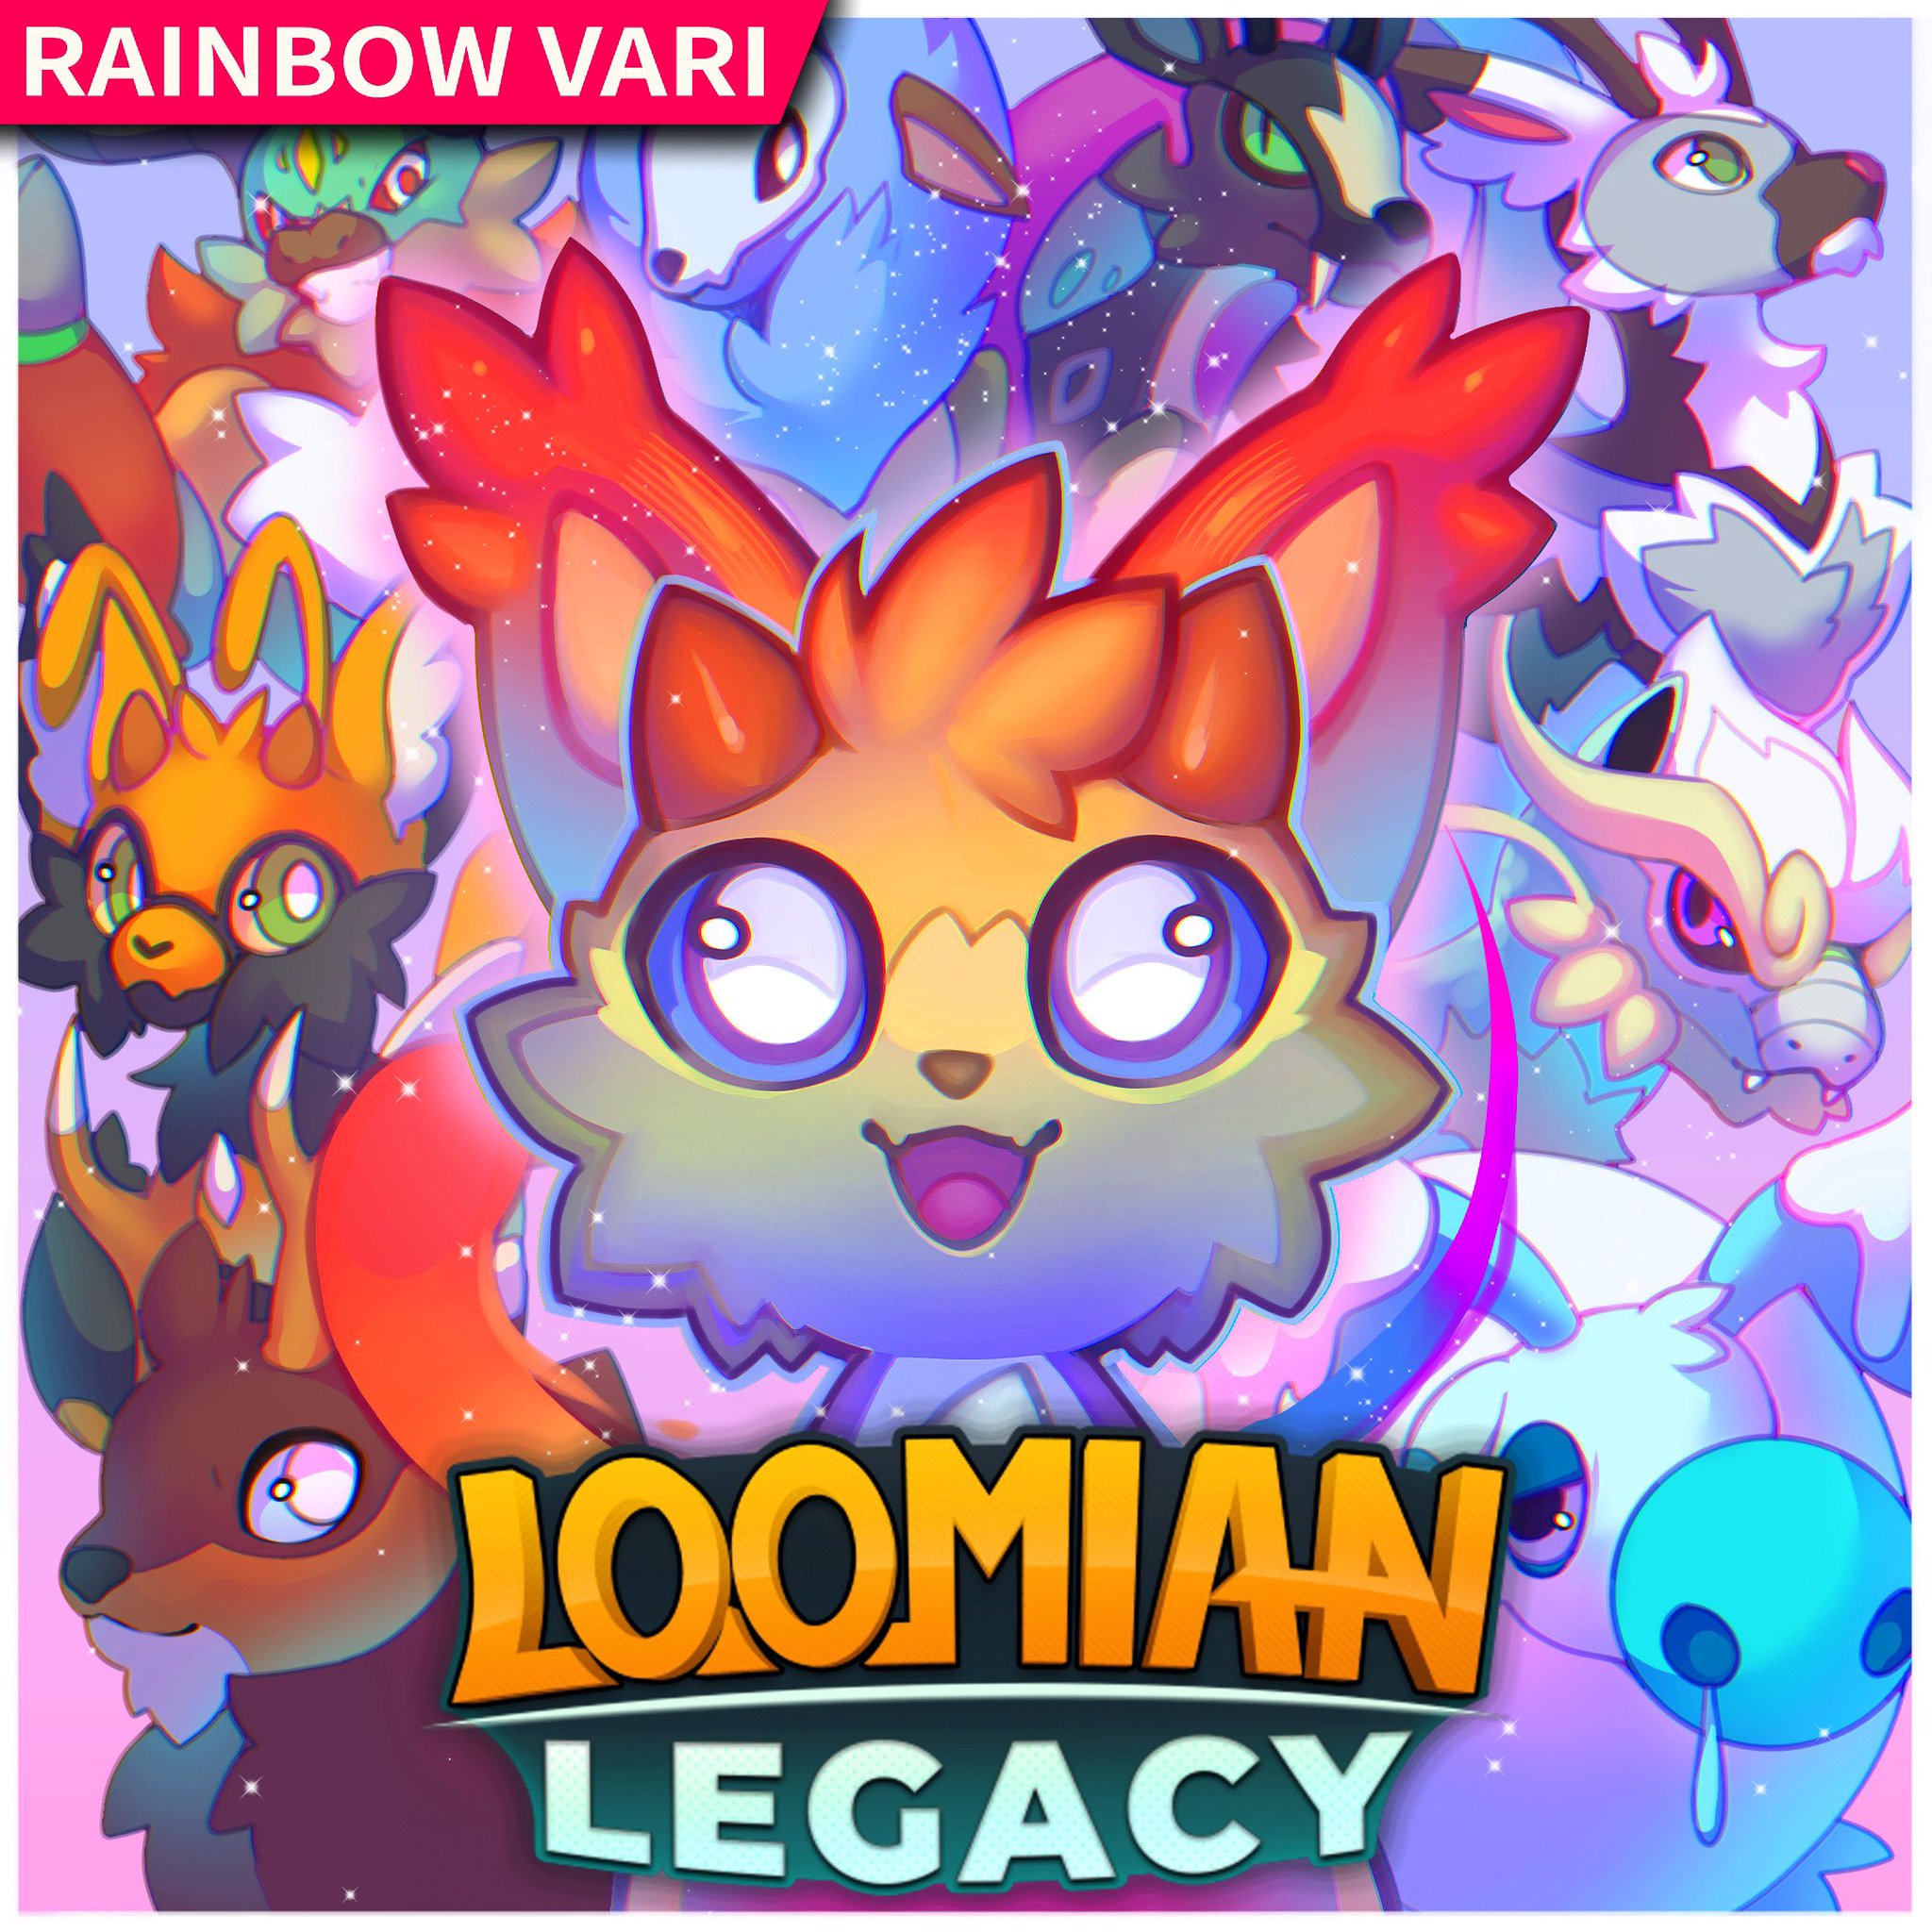 Llama Train Studio on X: The Rainbow Vari Event is now live in Loomian  Legacy! Speak with Rainbow Rick, who can be found standing in front of the  Lucky Wheel building in